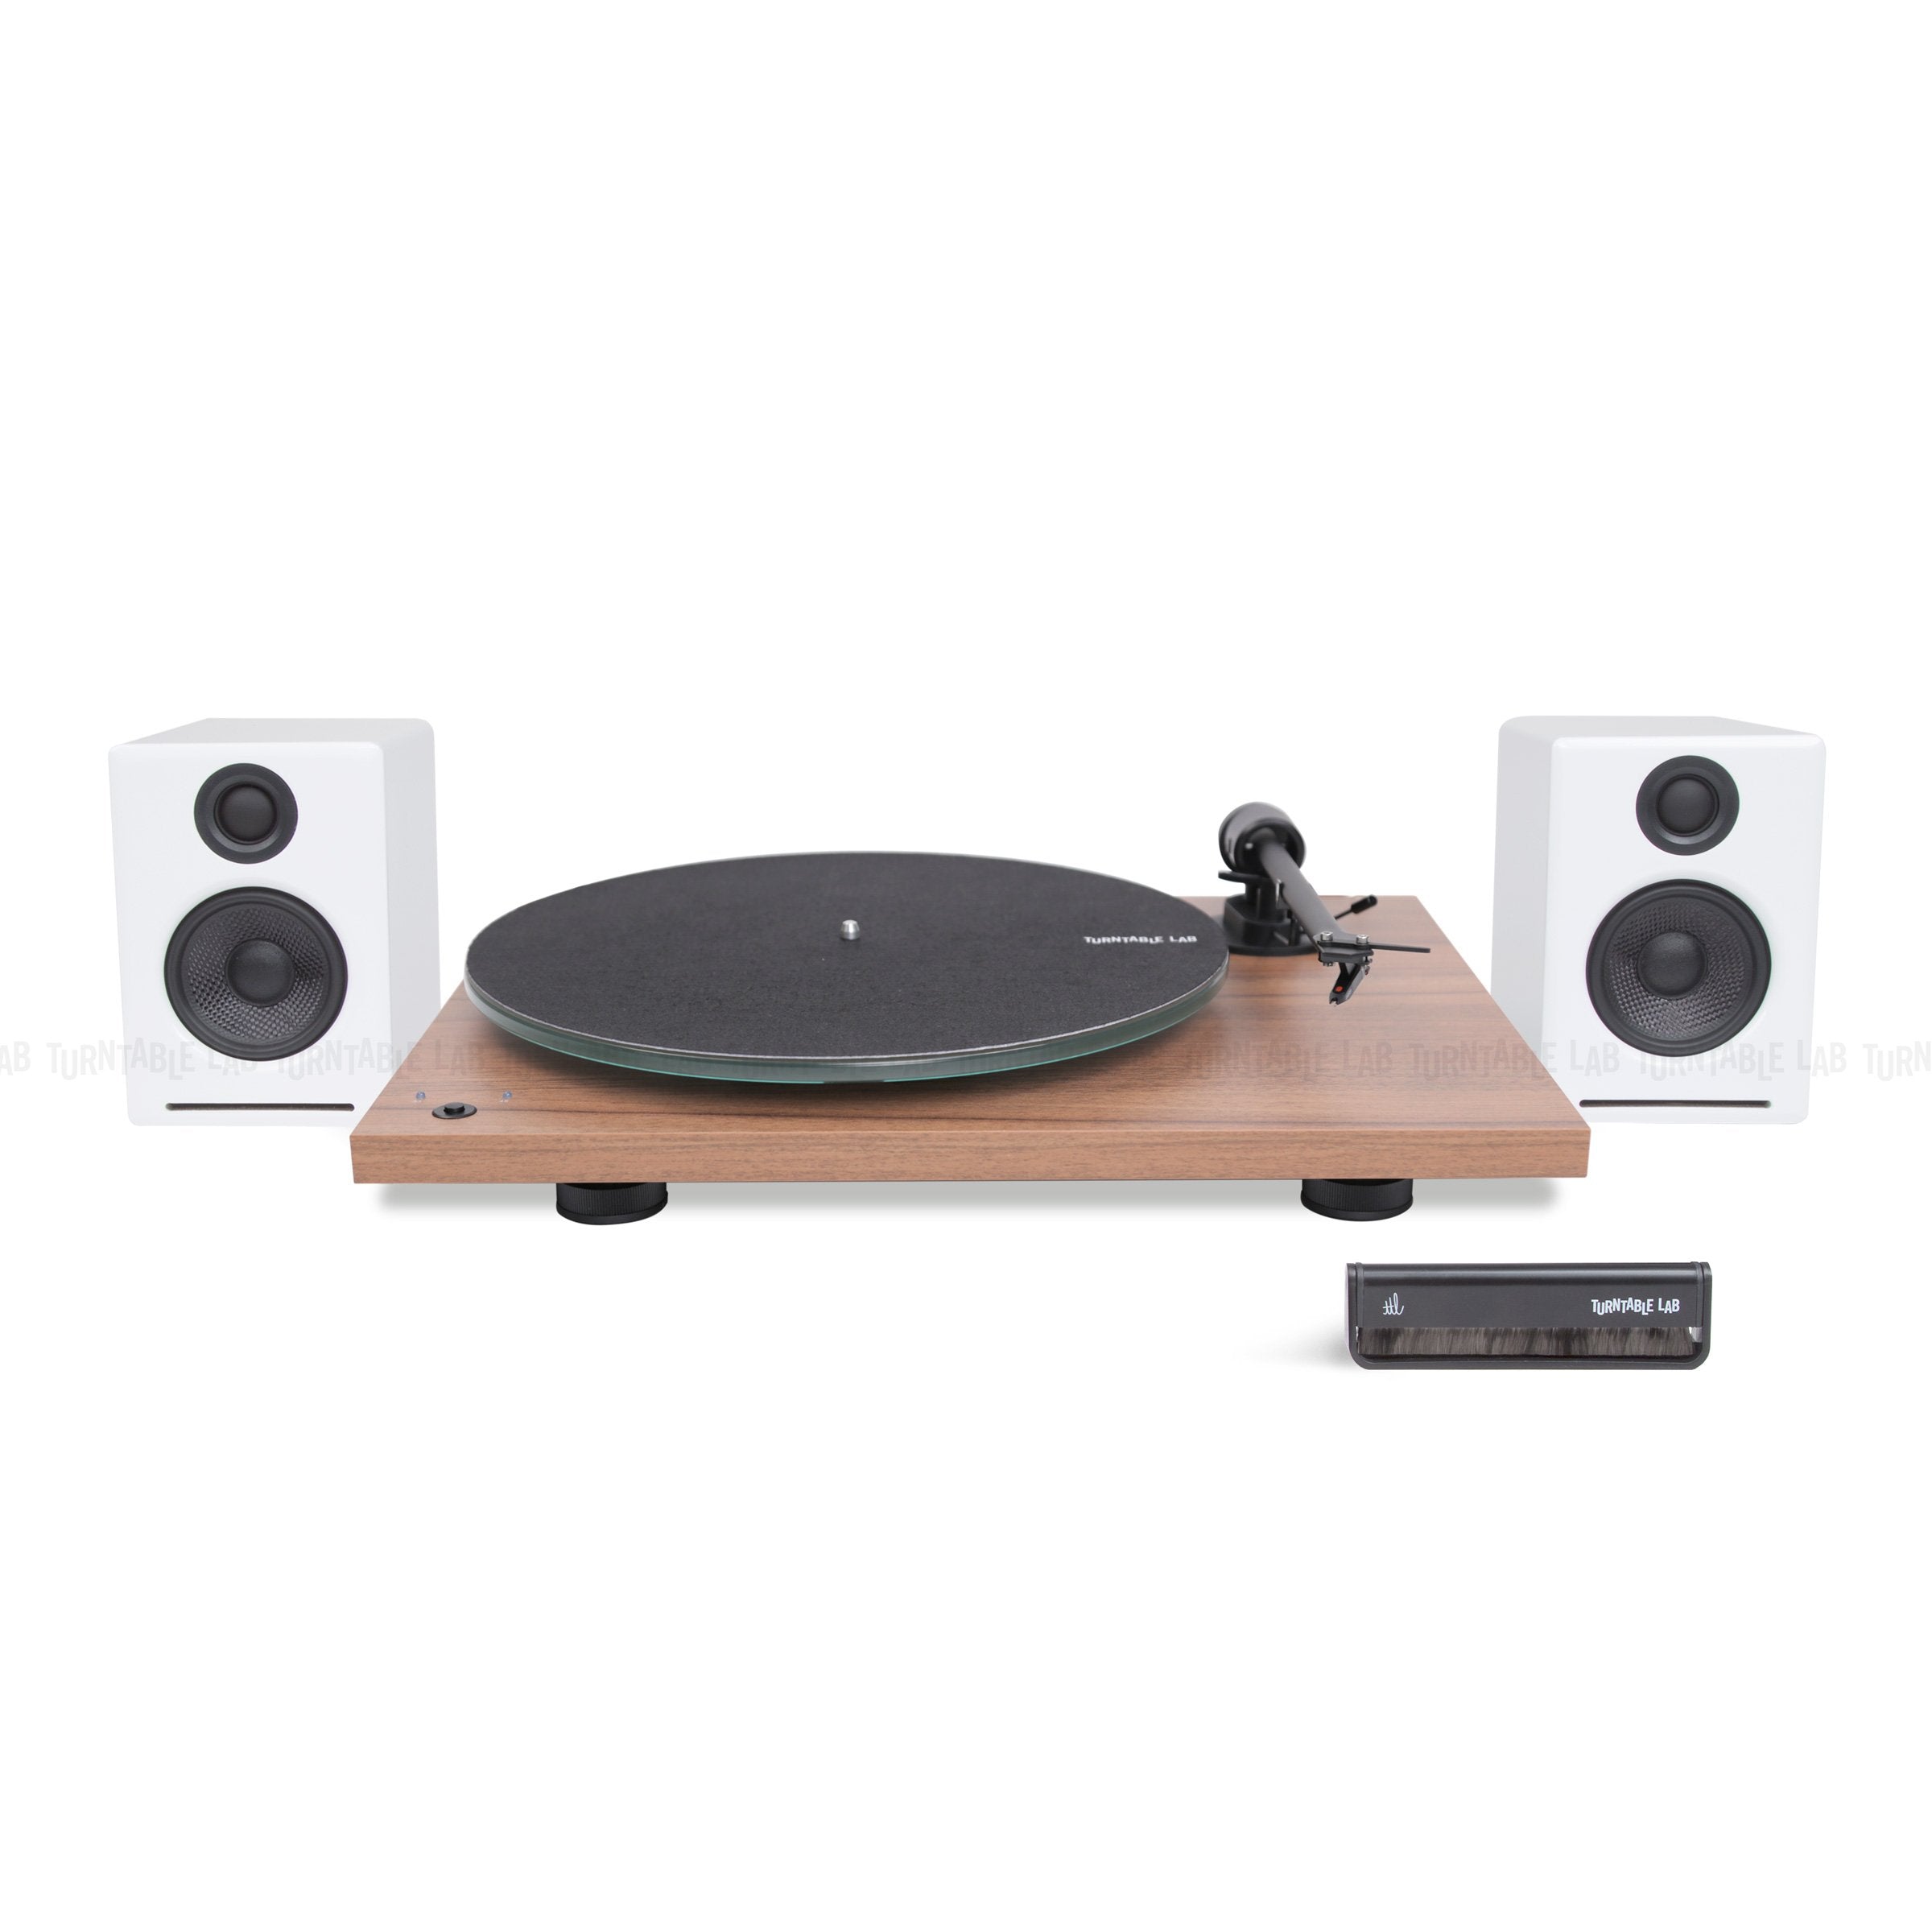 Pro-Ject: T1 Phono SB / Audioengine A2+W / Turntable Package